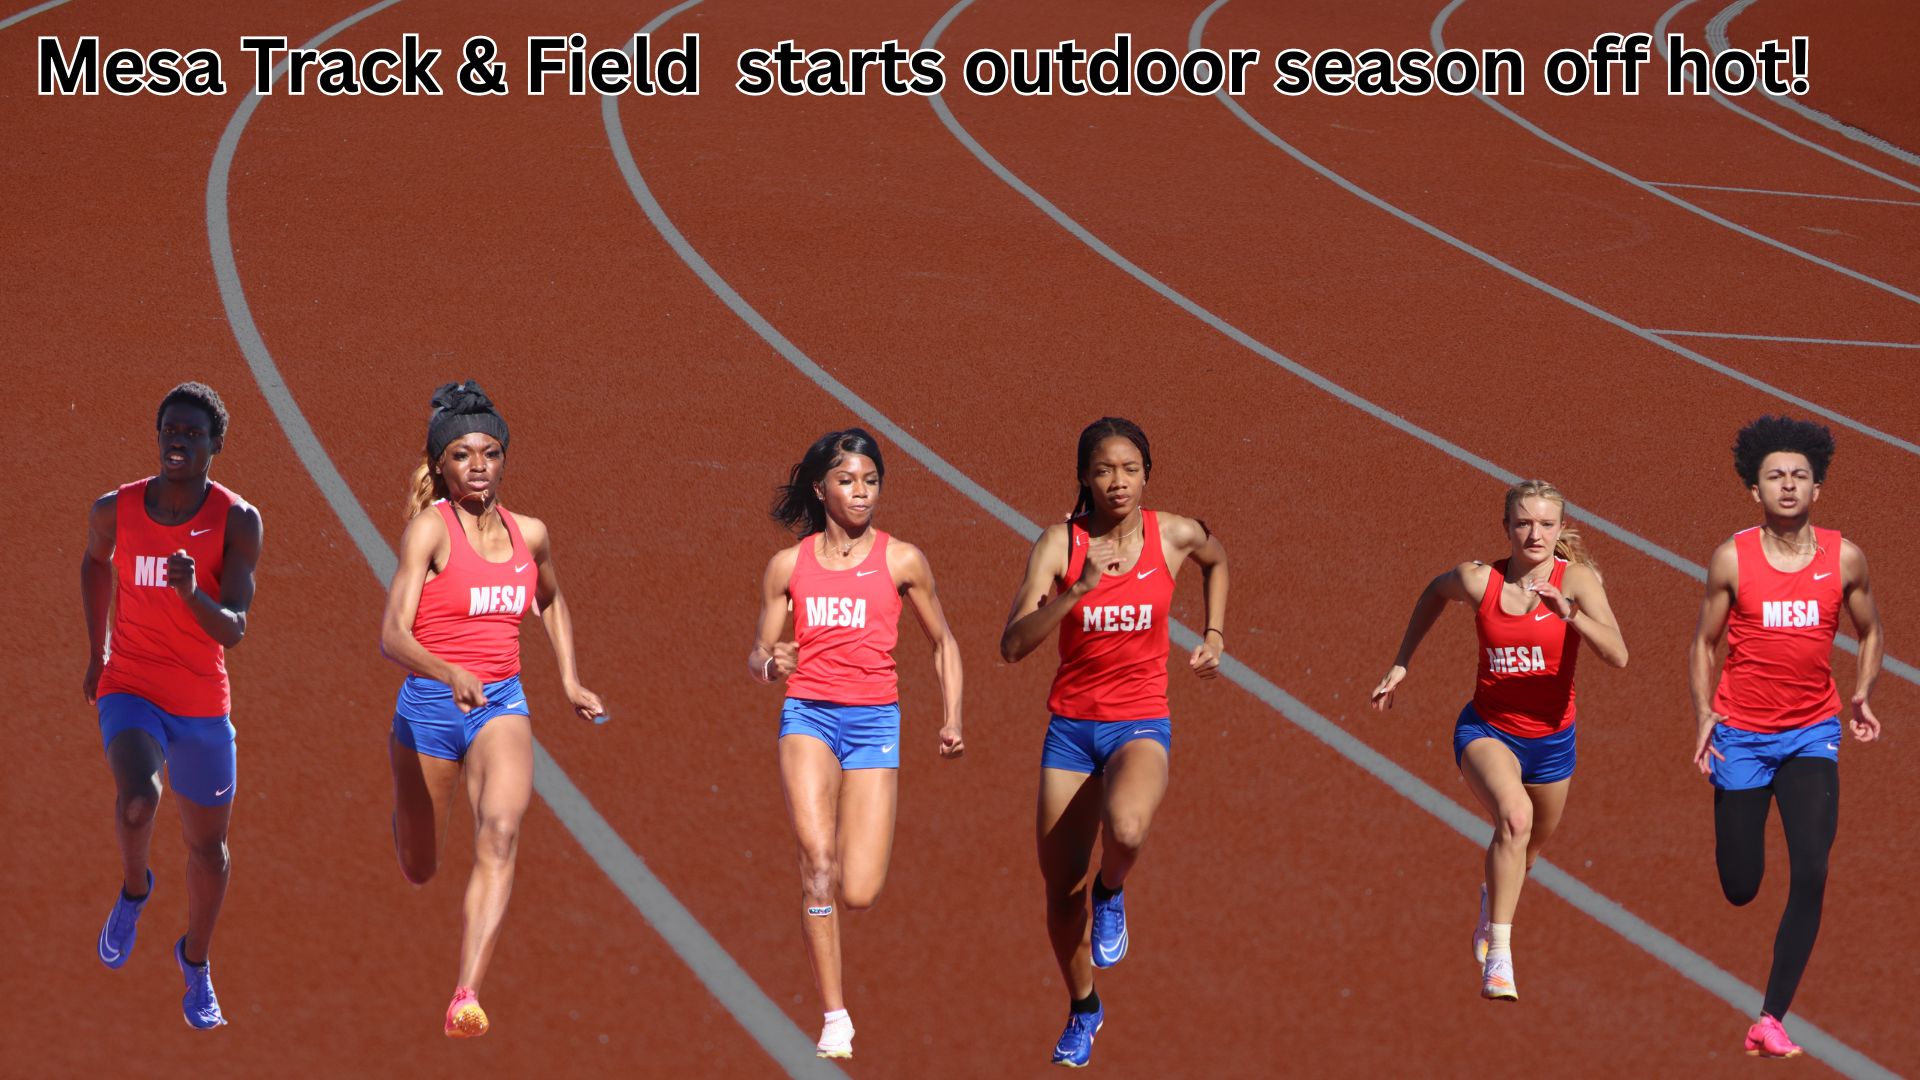 Mesa Track & Field opened outdoor season over the weekend